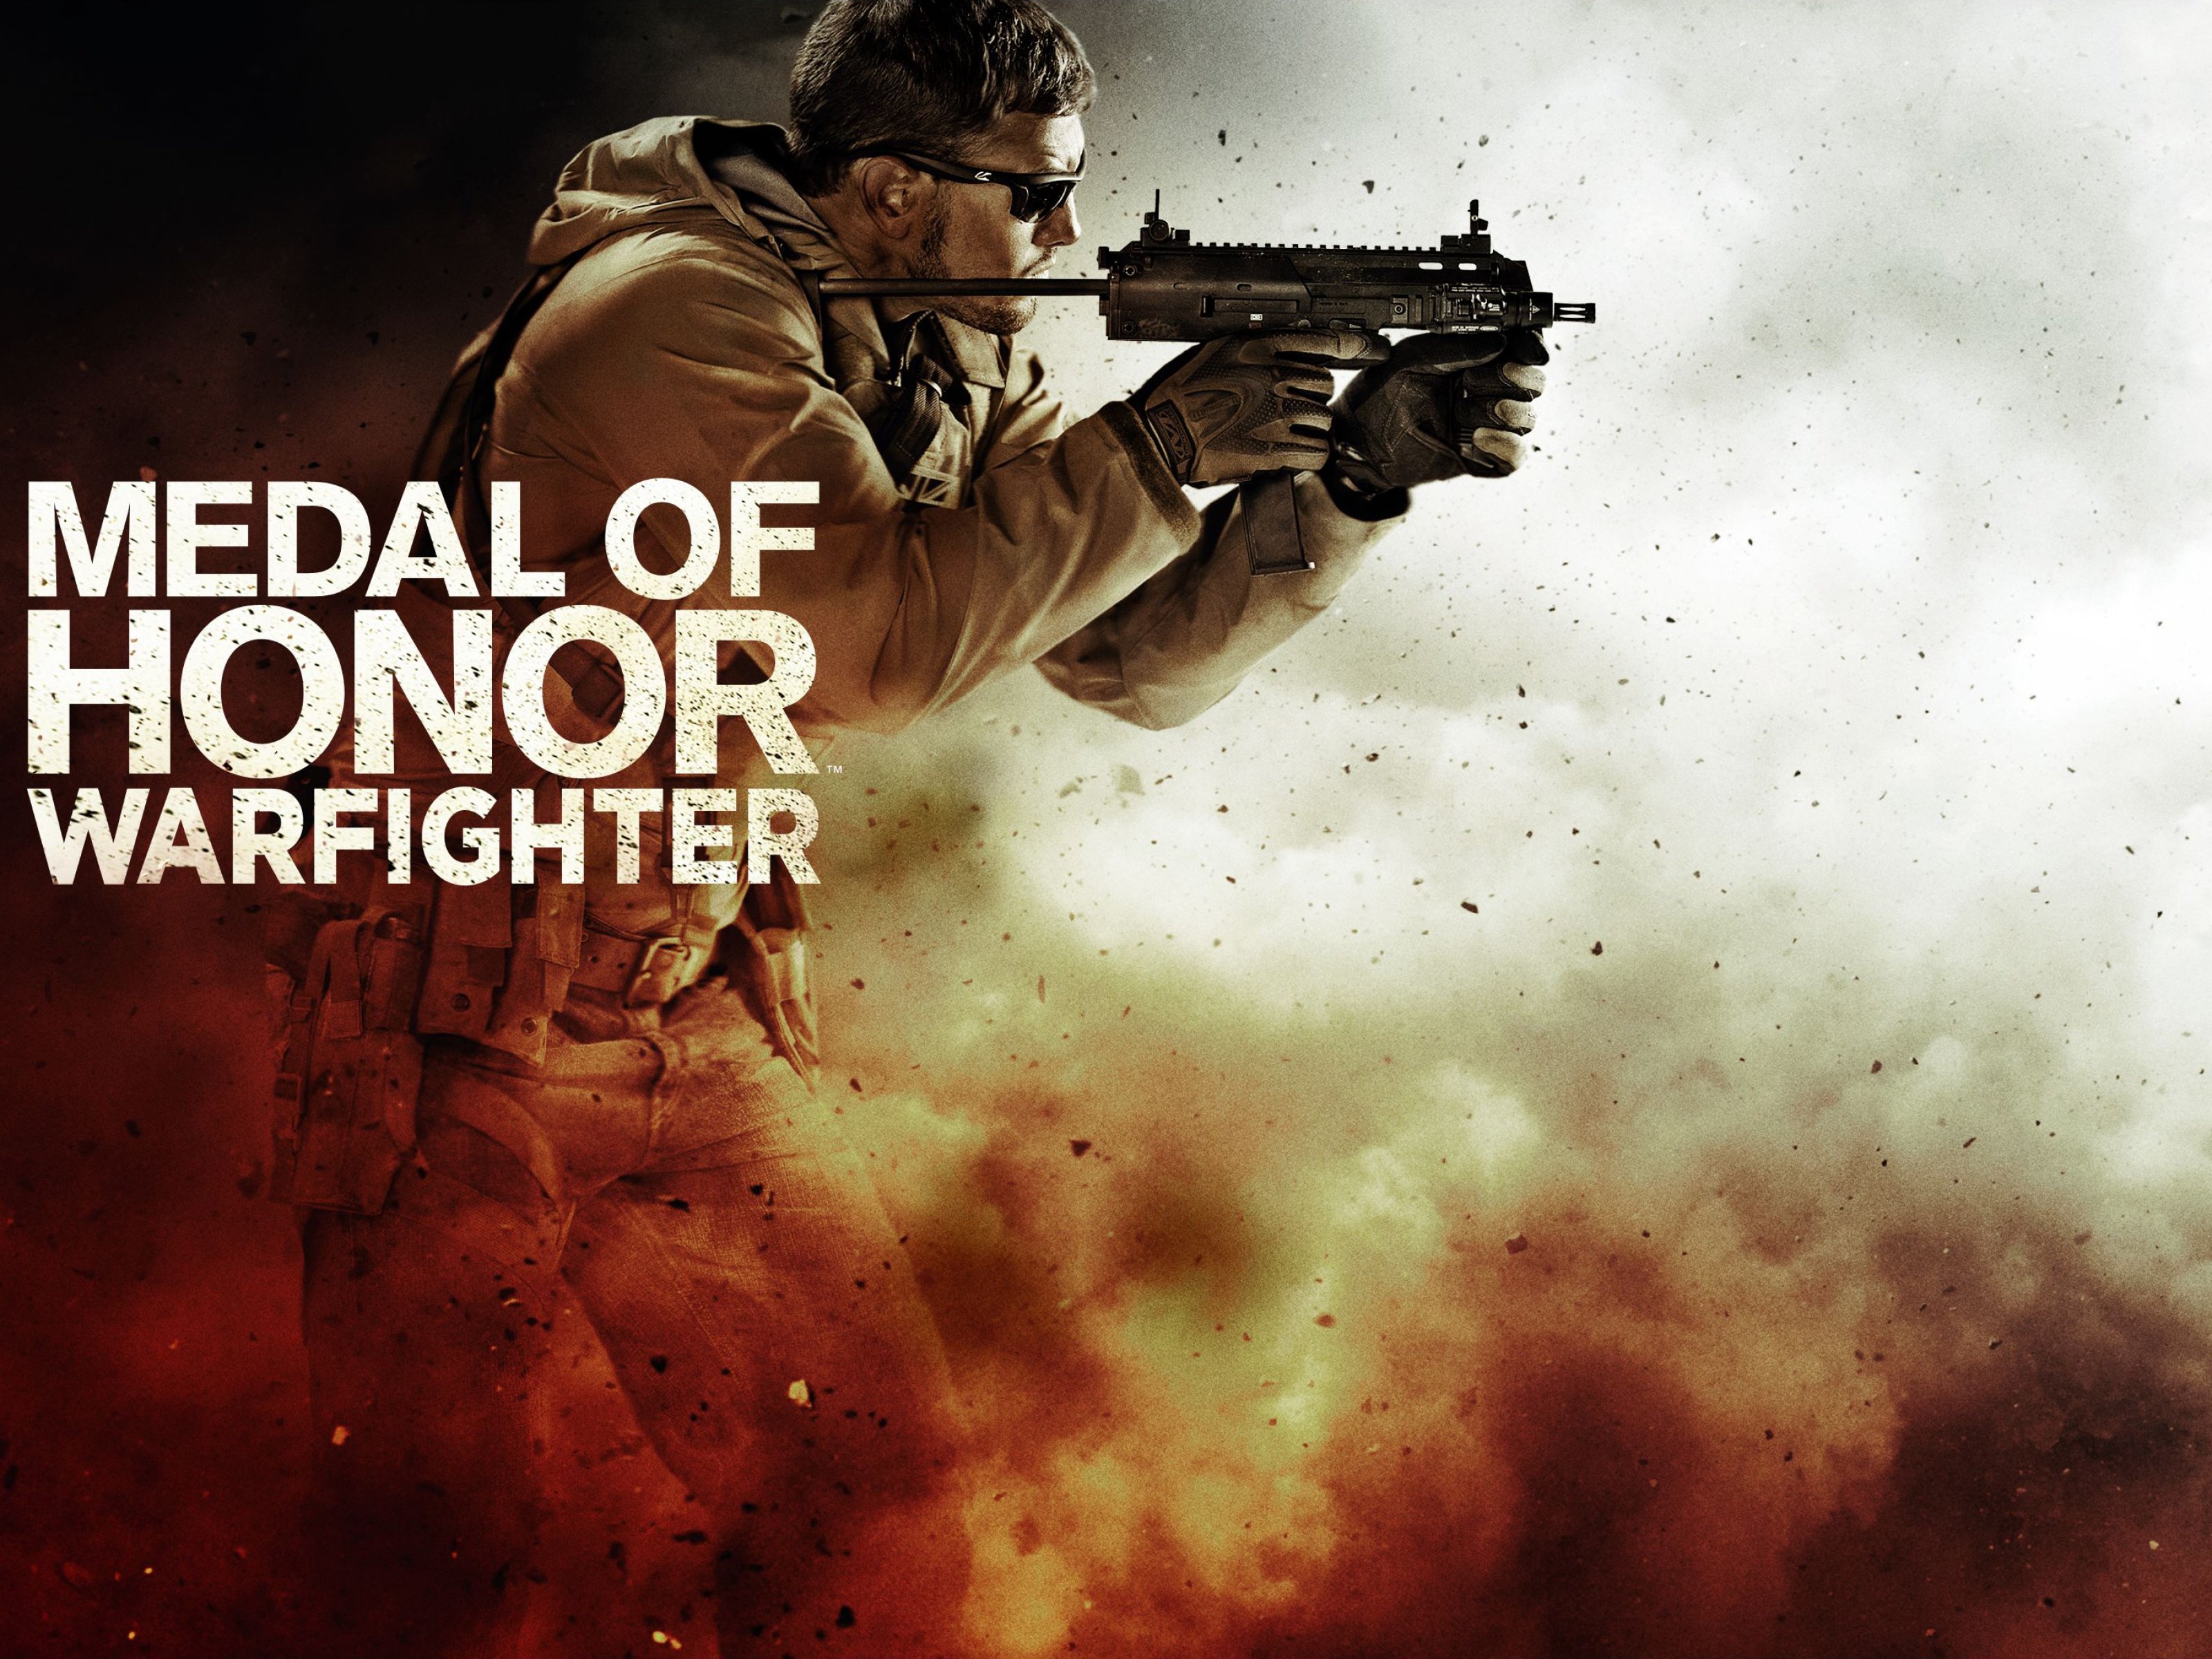 video game, medal of honor: warfighter, military, soldier, medal of honor